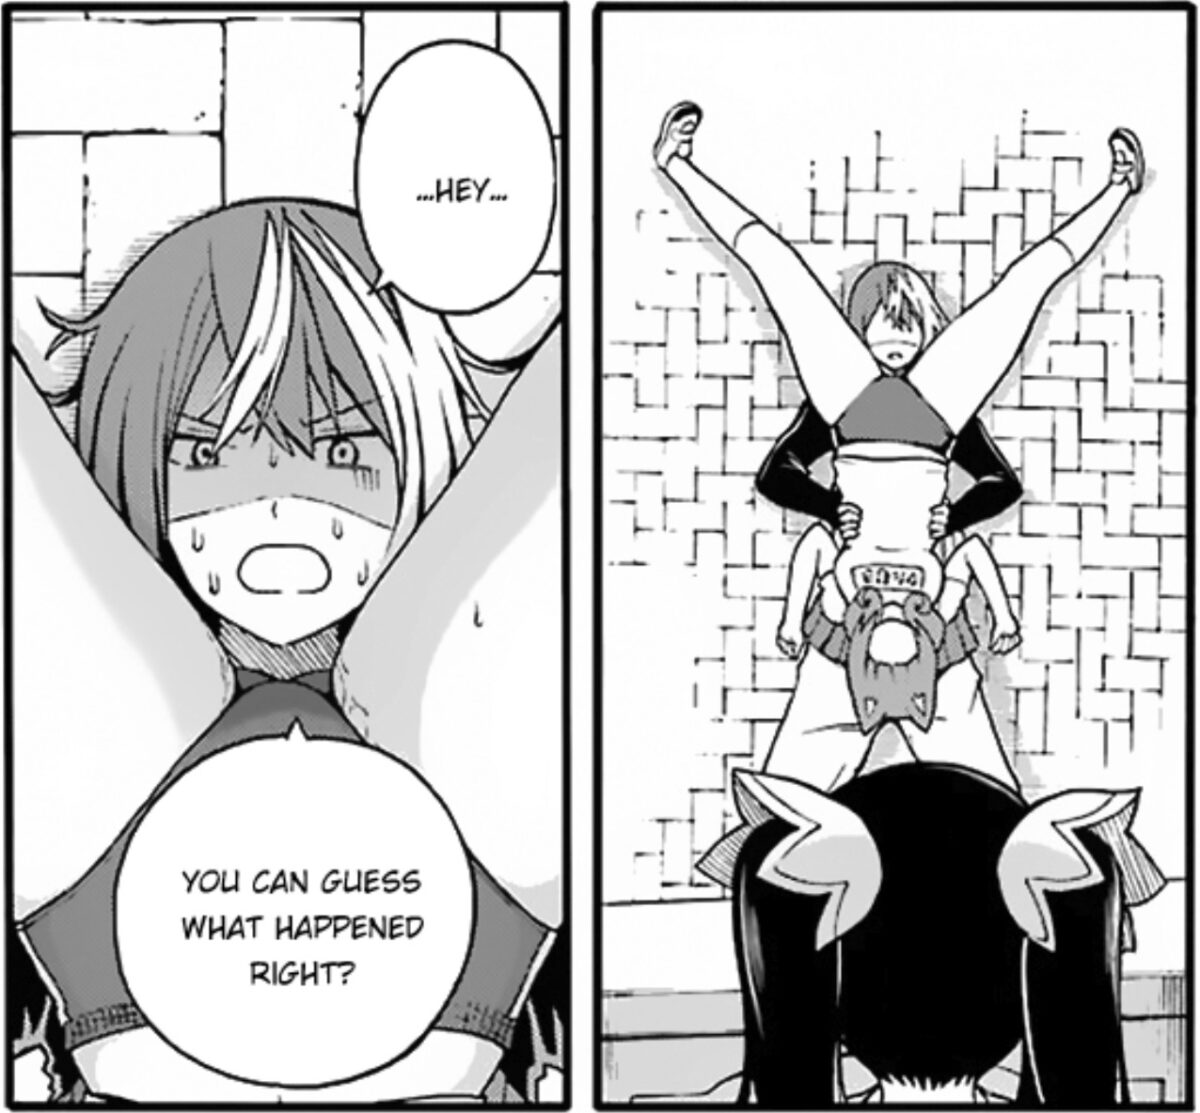 Futoku no Guild is the Perfect Blend of Fanservice and Fantasy